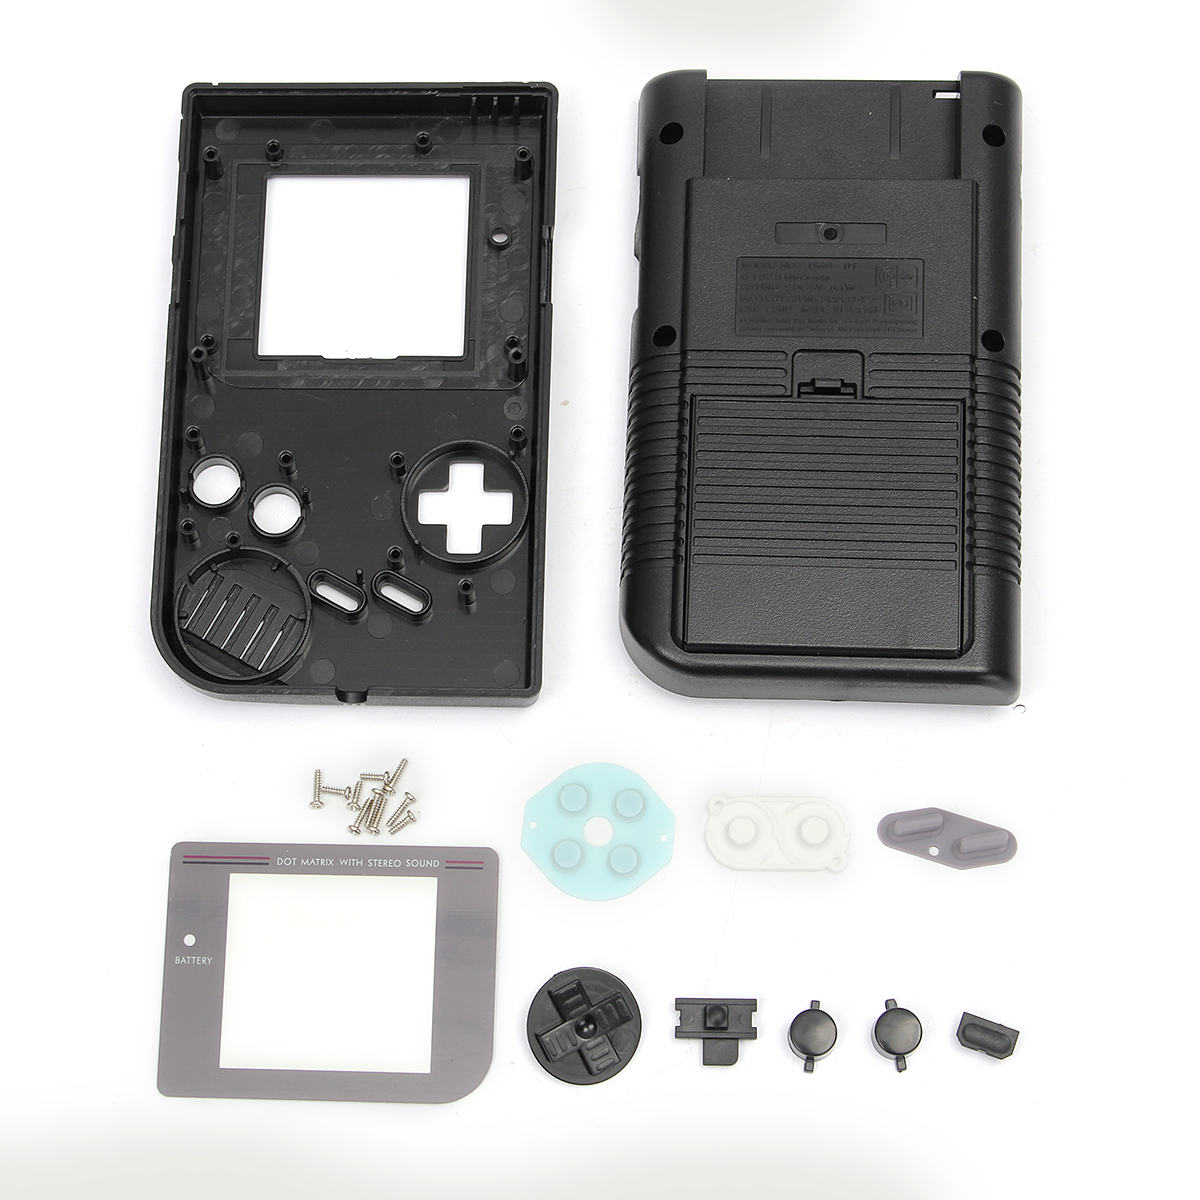 

Black Replacement Game Console Housing Shell Case For Nintendo Gameboy Classic For GB DMG